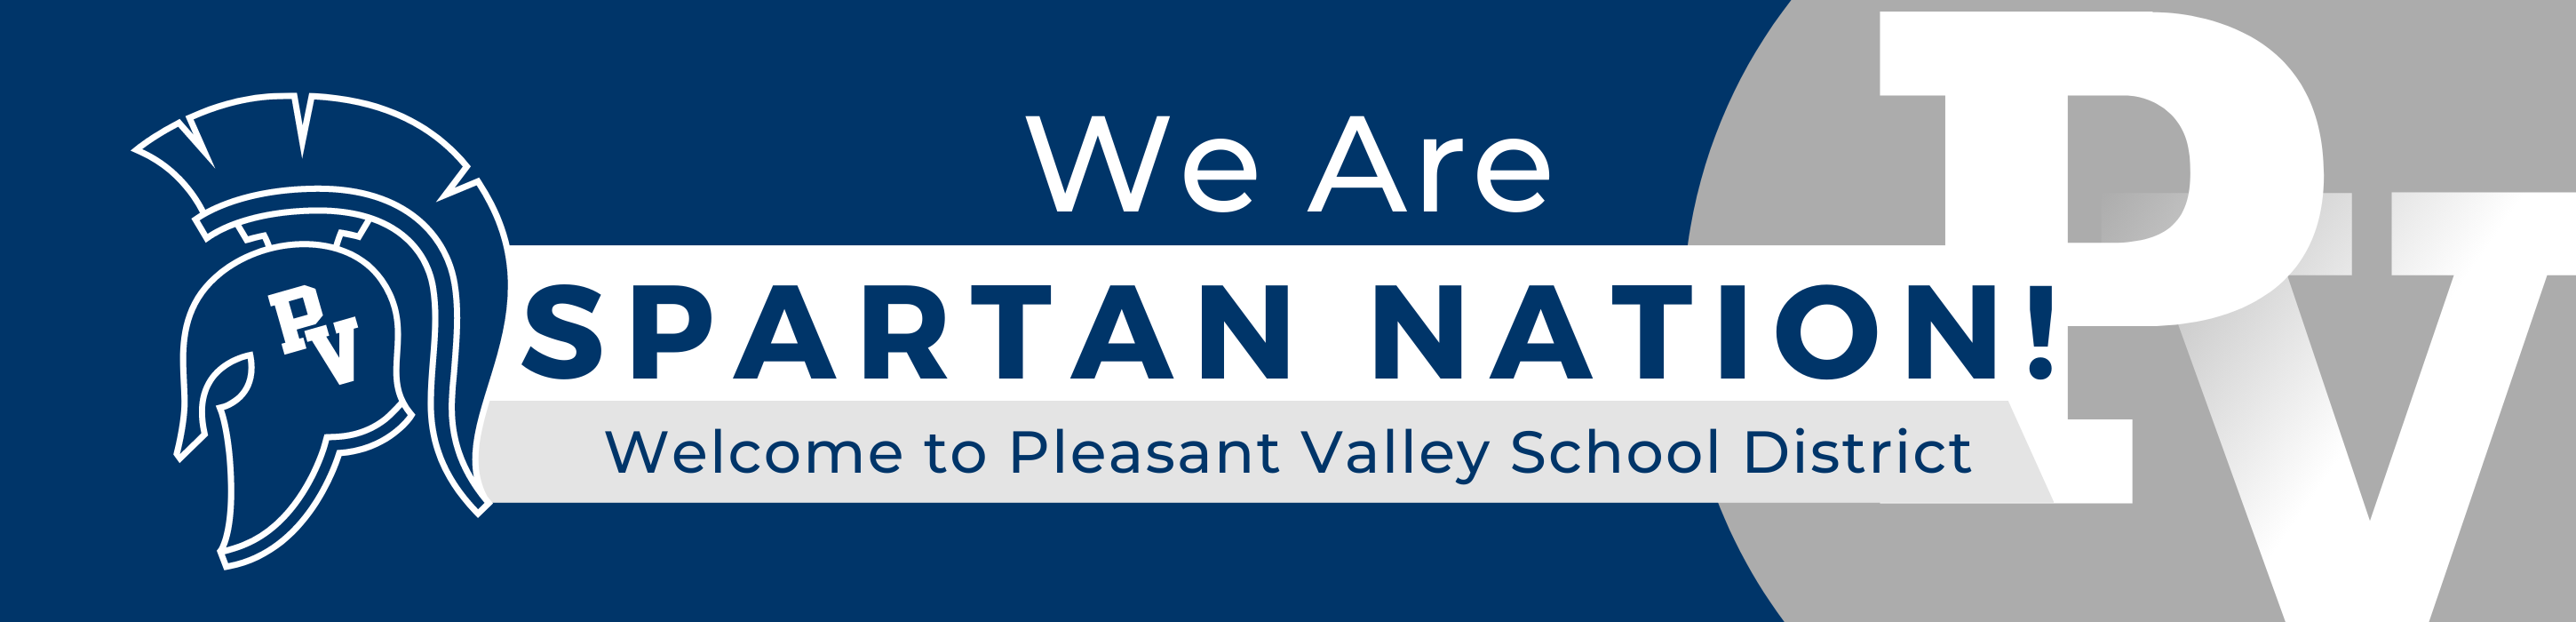 welcome-to-the-pleasant-valley-community-school-district-pleasant